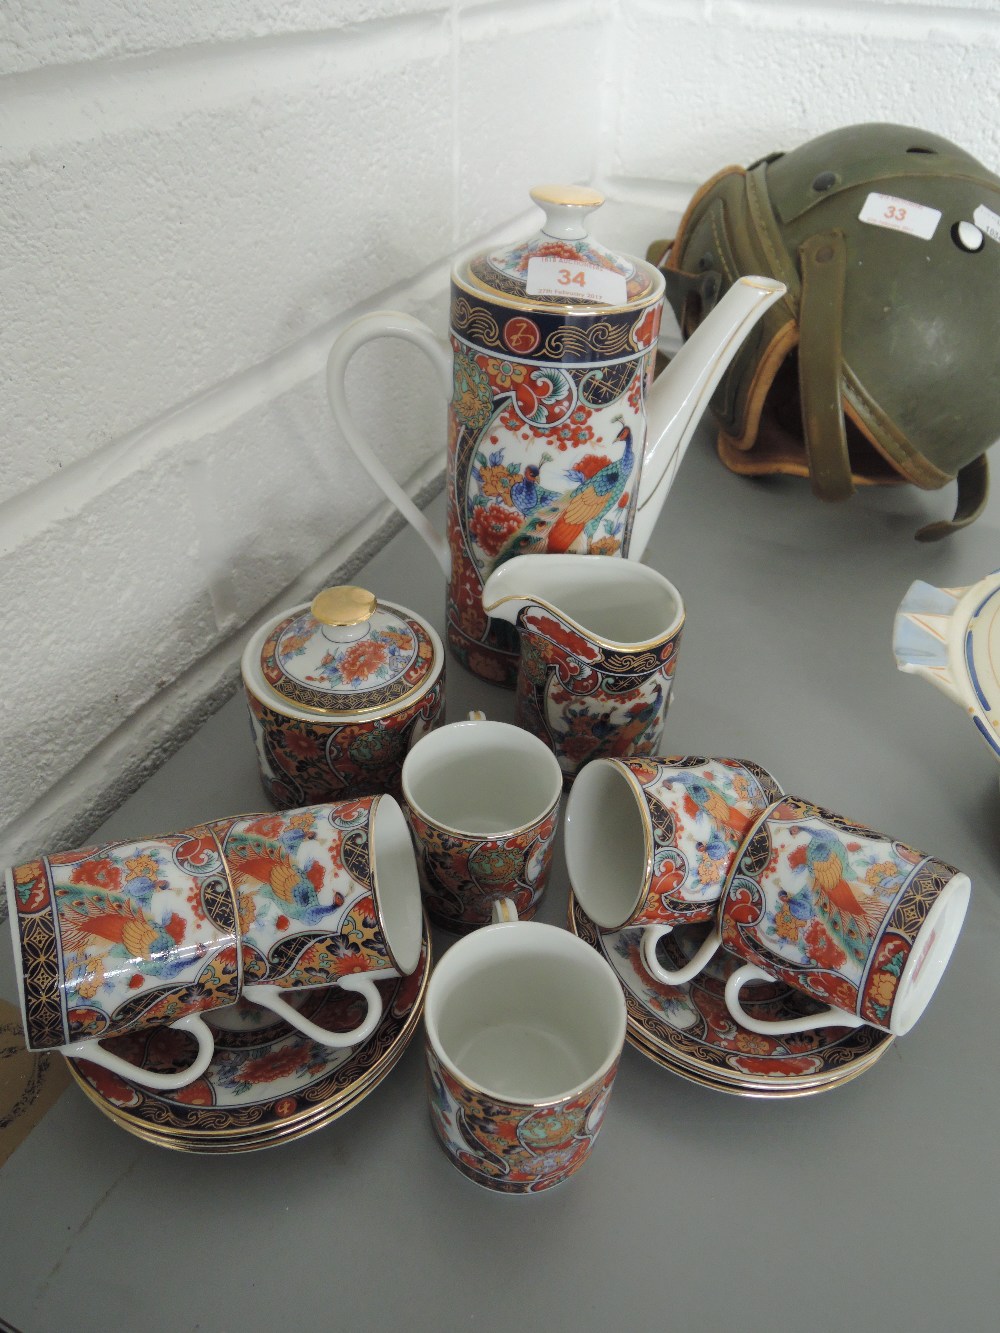 An Oriental style coffee set with peacock design